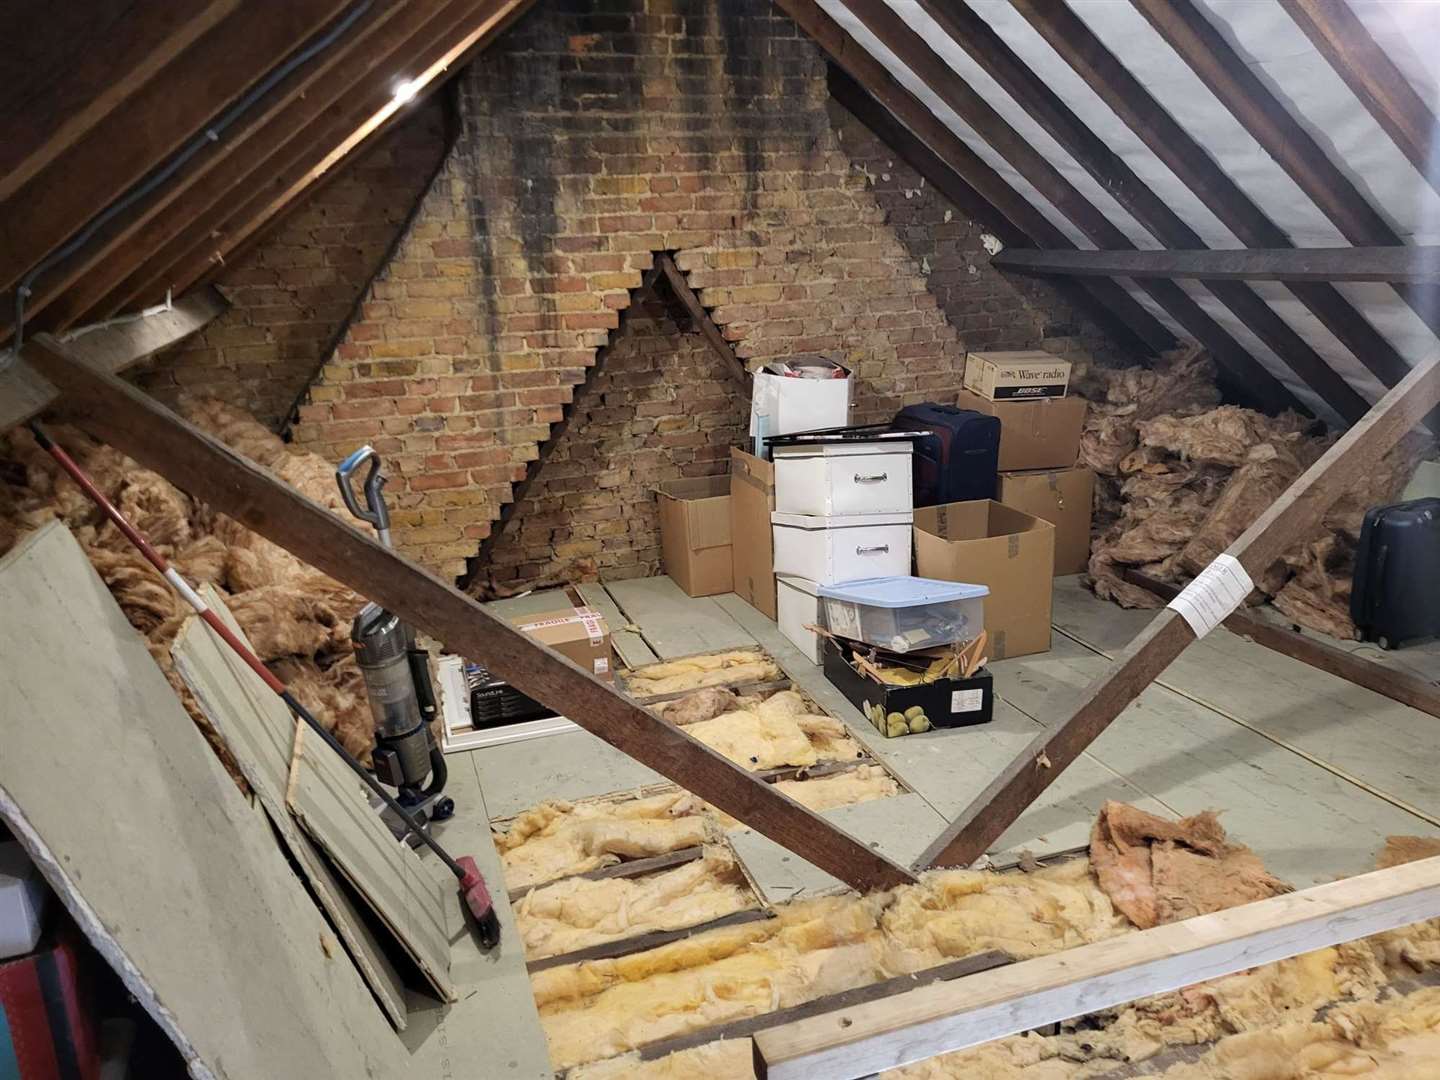 Loft installation and boards were lifted following third party electricians make safe work